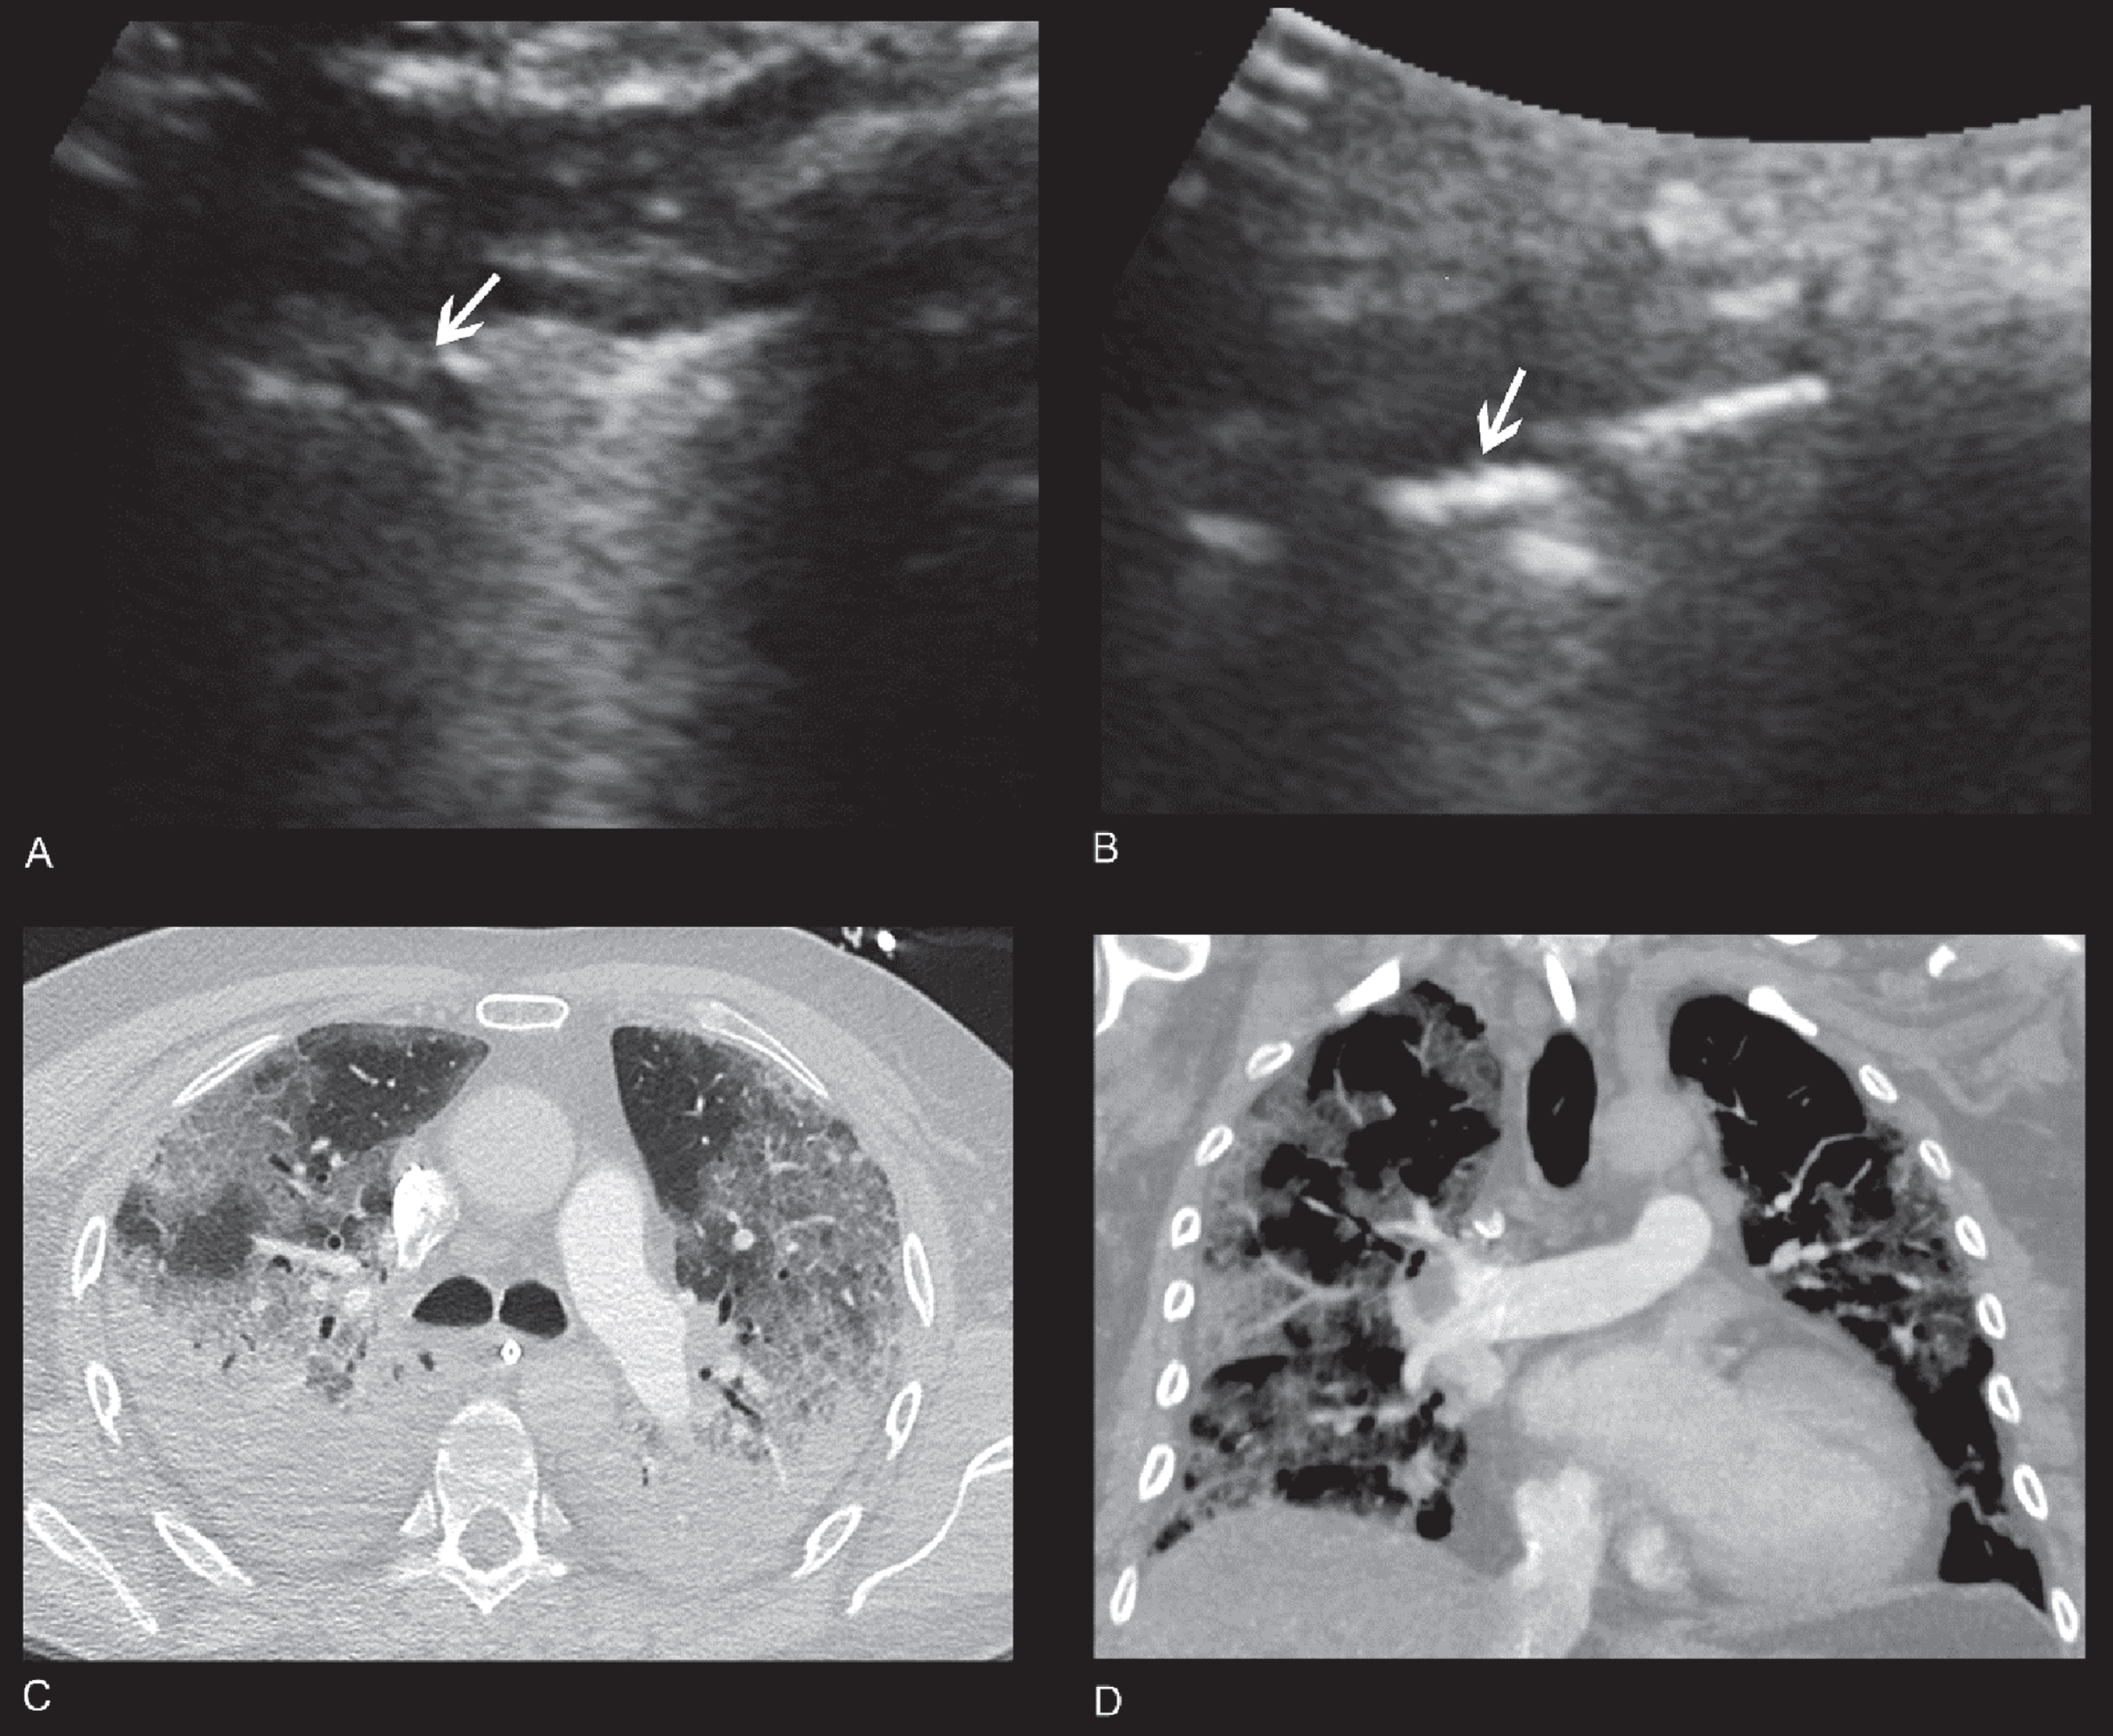 65 year old male patient with severe COVID-19 pneumonia. A/B: Vscan images using a transabdominal probe display consolidations with A- and B-lines. Image quality showed minor diagnostic limitations (2-3). C/D: CT images displaying small bilateral pleural effusions and diffuse, predominantly peripheral ground glass opacities, and peripheral consolidations consistent with COVID-19 pneumonia.